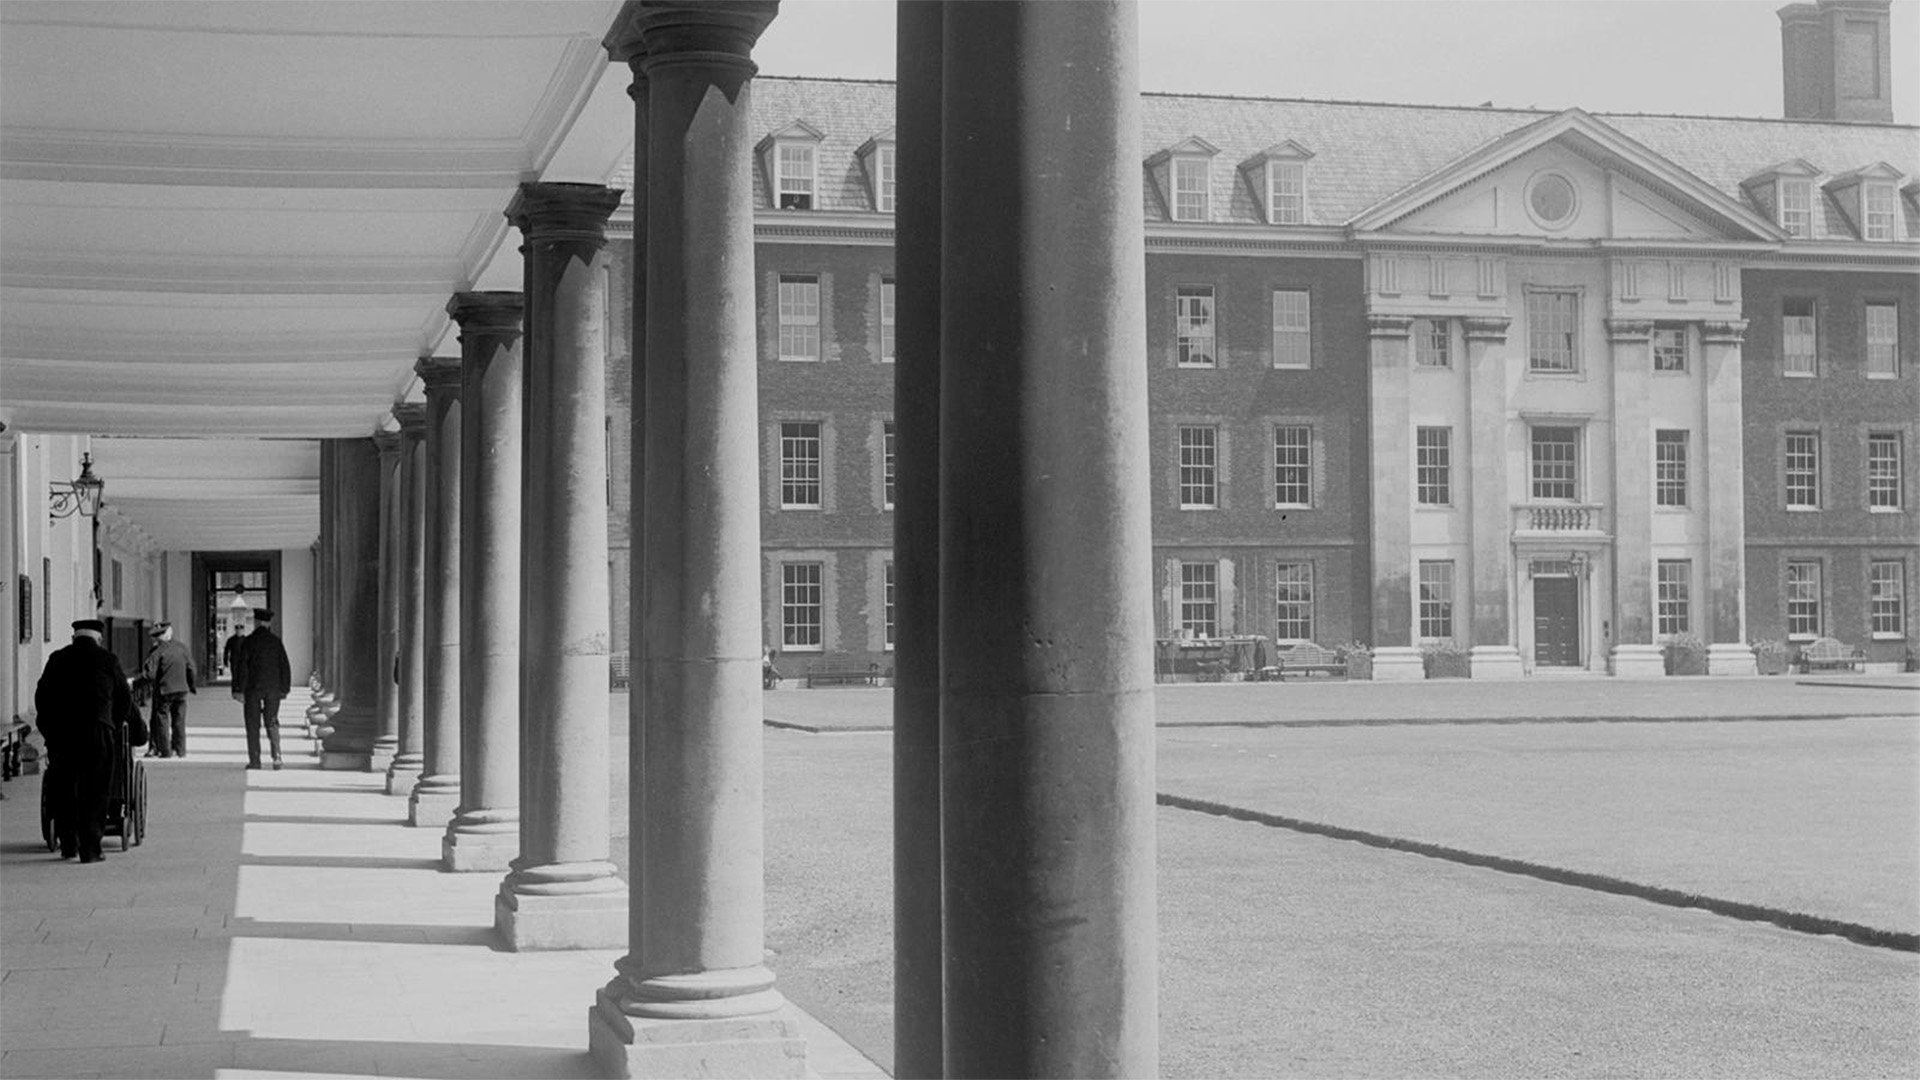 Exterior view of Royal Hospital Chelsea from the colonnade